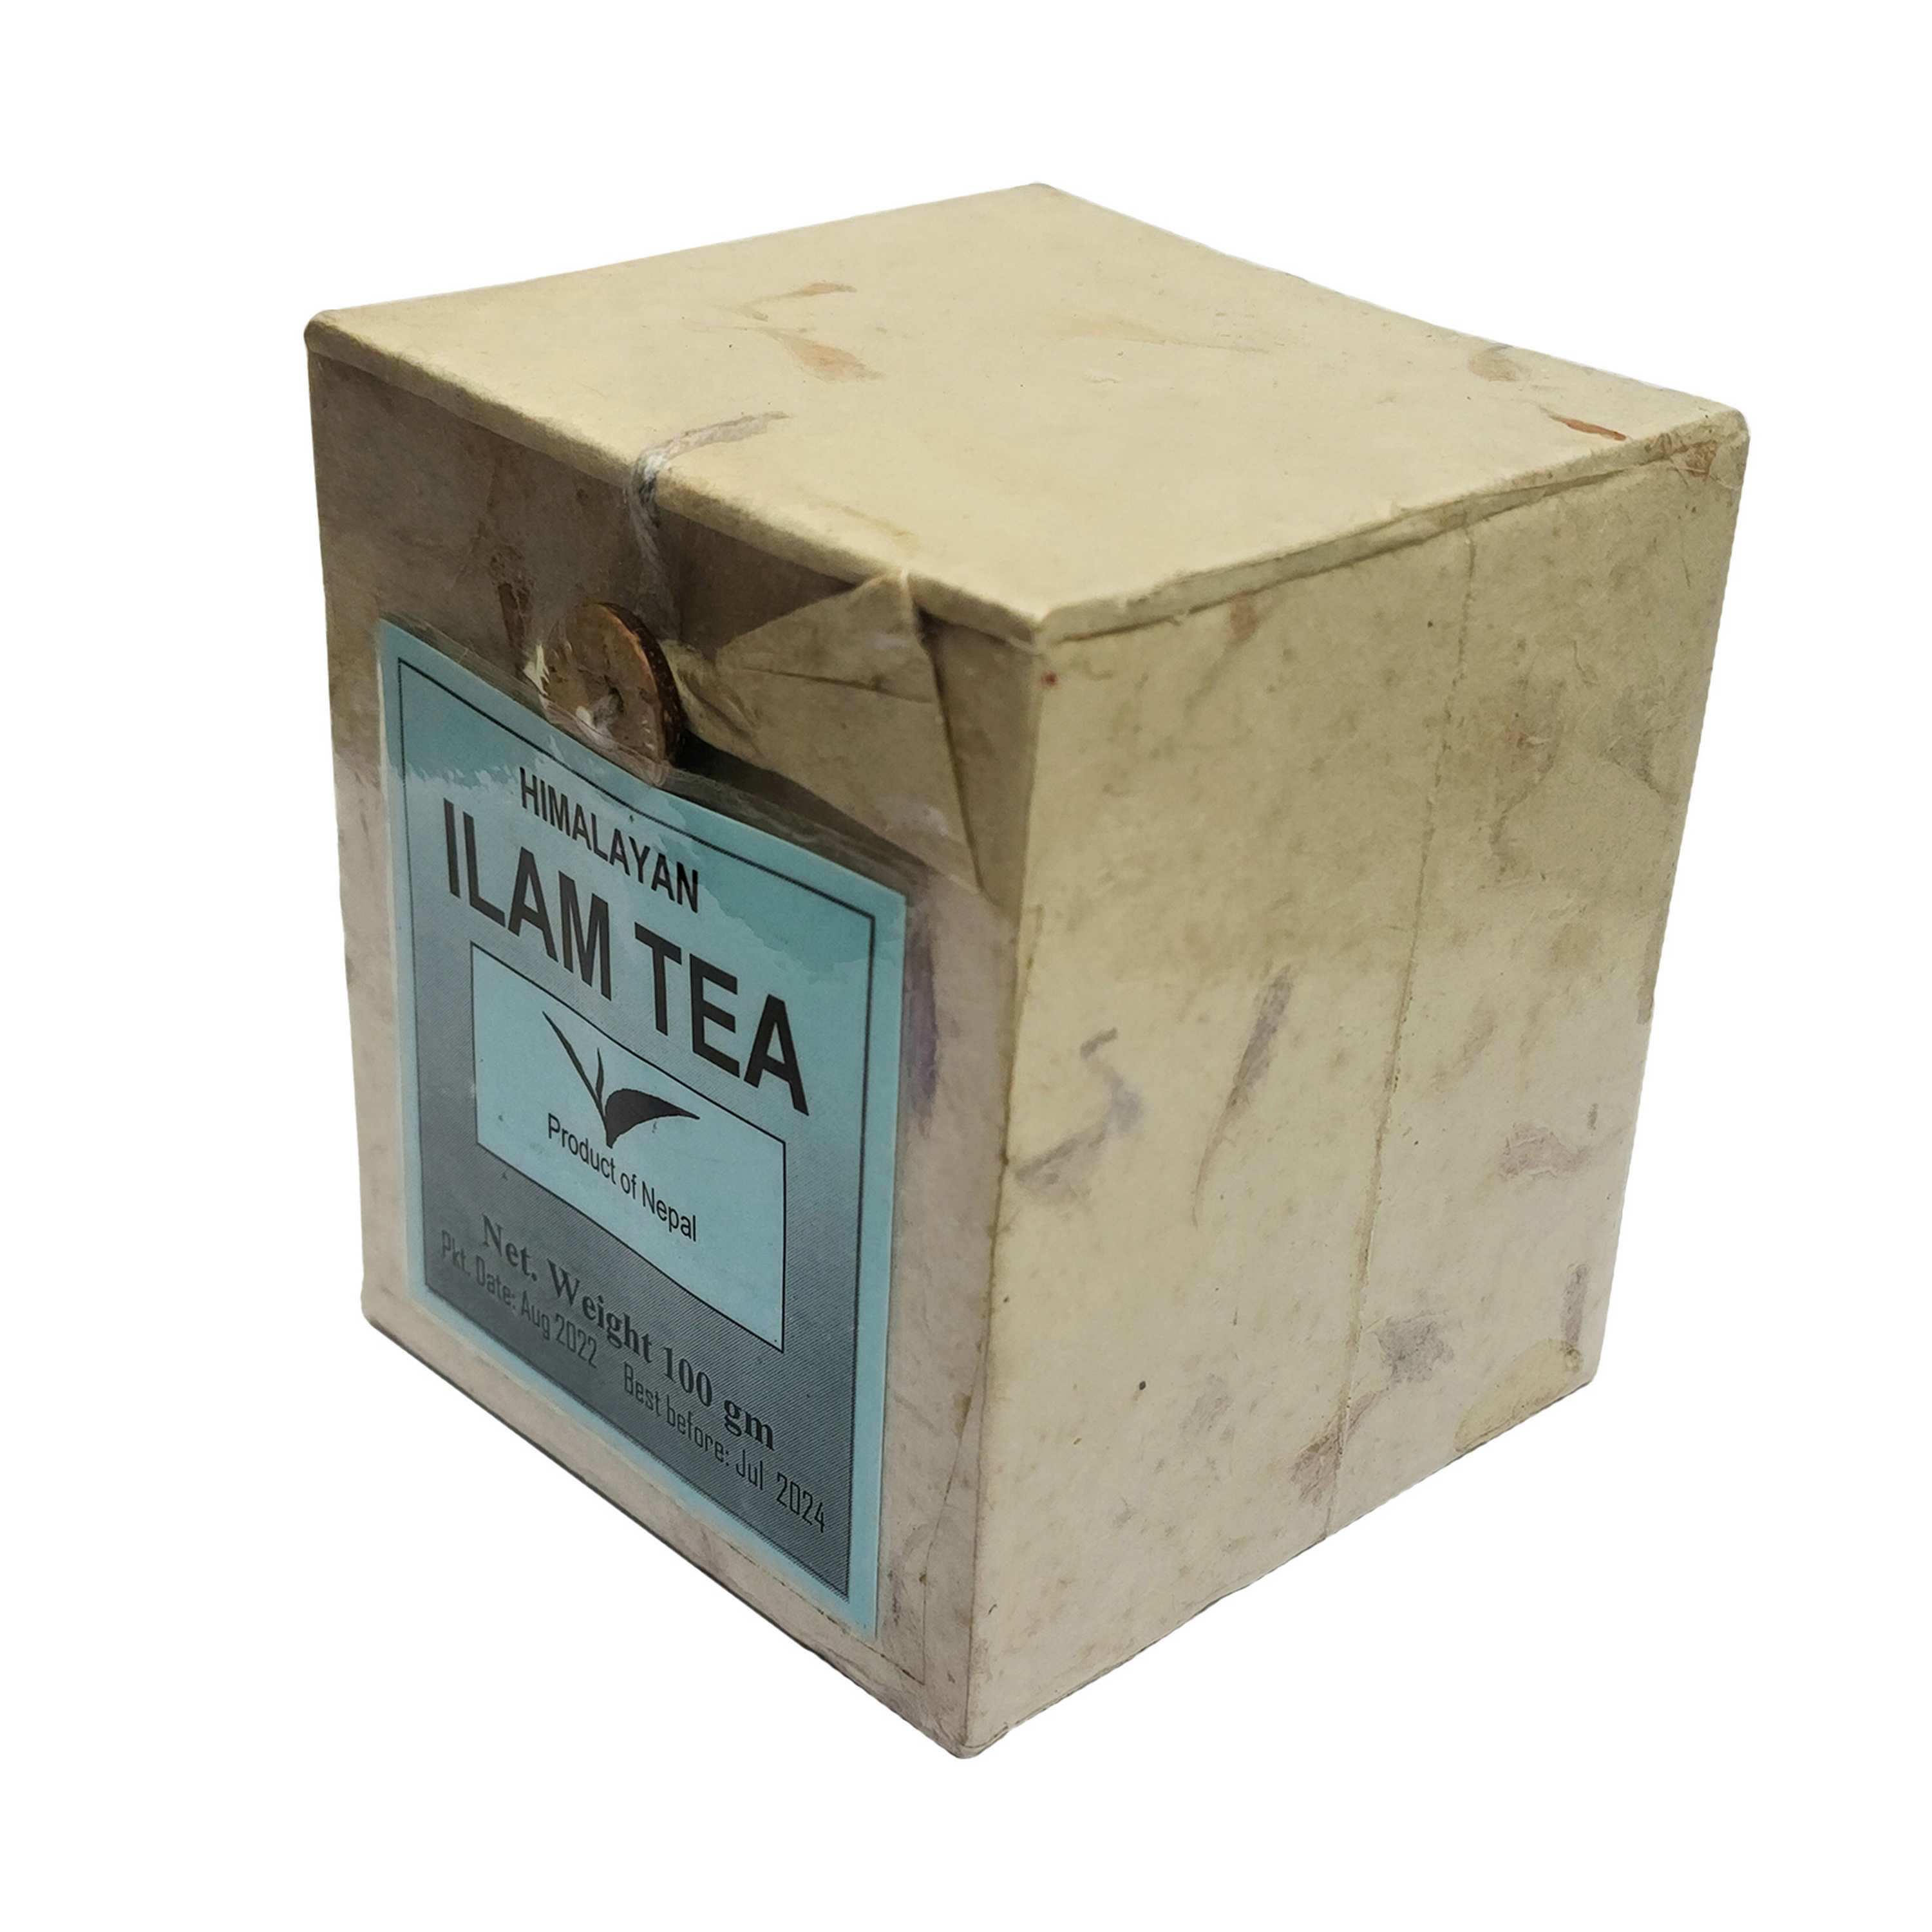 Himalayan Ilam Tea, Product of Nepal, 10 by 9 cm, made by Organic Tea,  Herbal Products, Nepali Herbal Tea